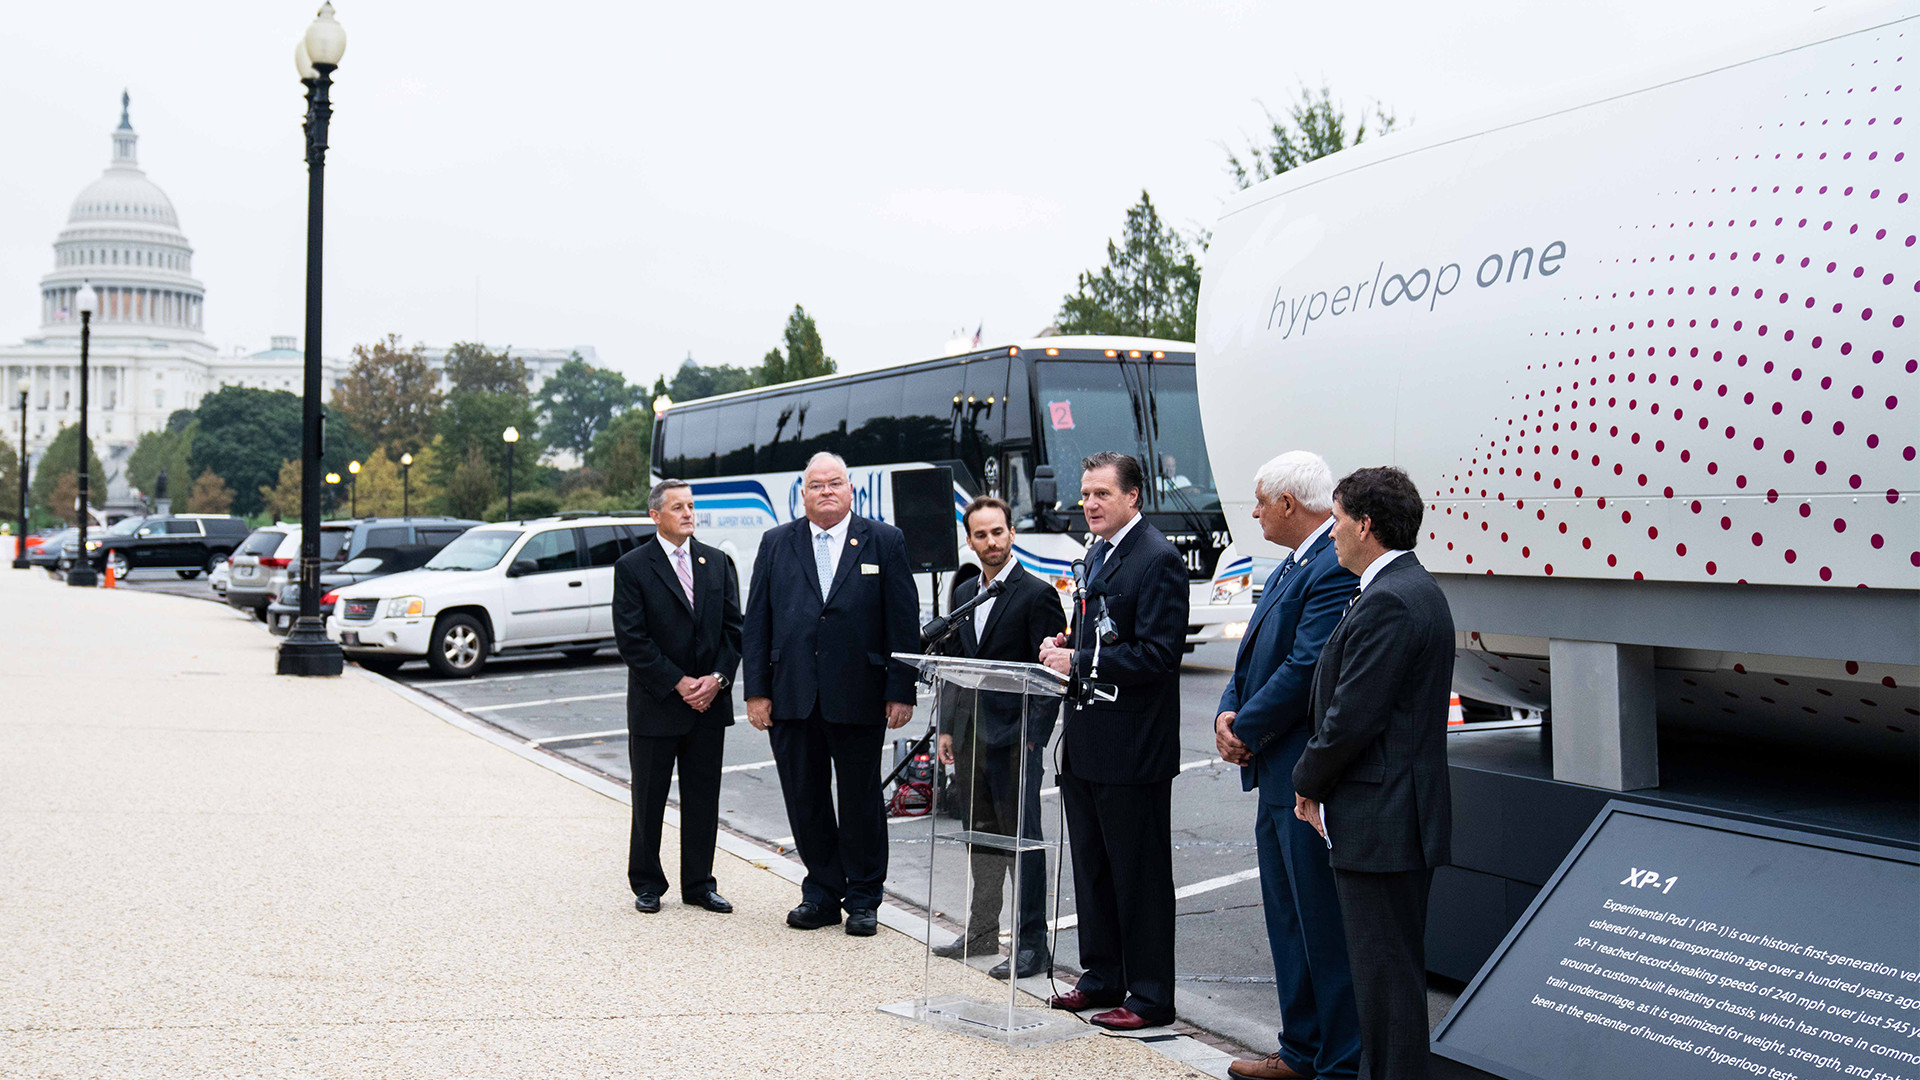 Left to right: Congressman Bruce Westerman, Congressman Billy Long, Virgin Hyperloop One Co-Founder and Chief Technology Officer Josh Giegel, Congressman Mike Turner, Congressman Bob Gibbs, and Congressman Troy Balderson spoke about hyperloop technology and its potential to transform mass transit in the United States. 